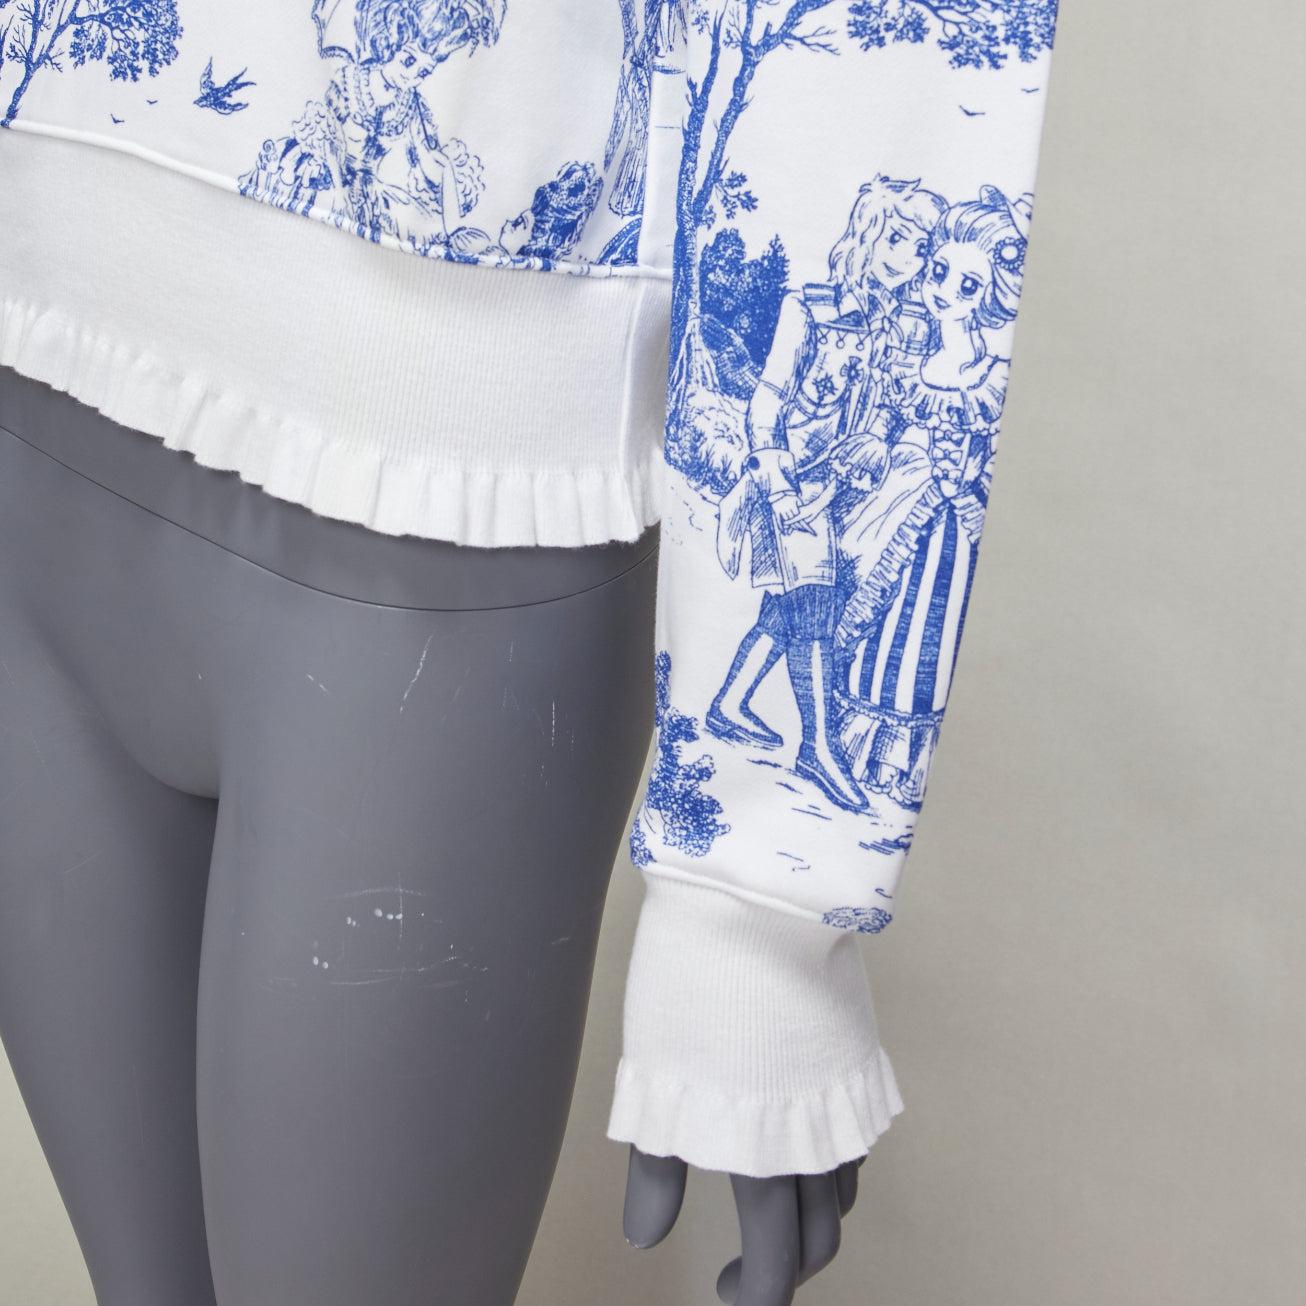 MOSCHINO Anime Toile De Jouy blue white frill trim hoodie sweater IT36 XXS
Reference: AAWC/A01110
Brand: Moschino
Designer: Jeremy Scott
Material: Cotton
Color: White, Blue
Pattern: Abstract
Closure: Pullover
Made in: Portugal

CONDITION:
Condition: